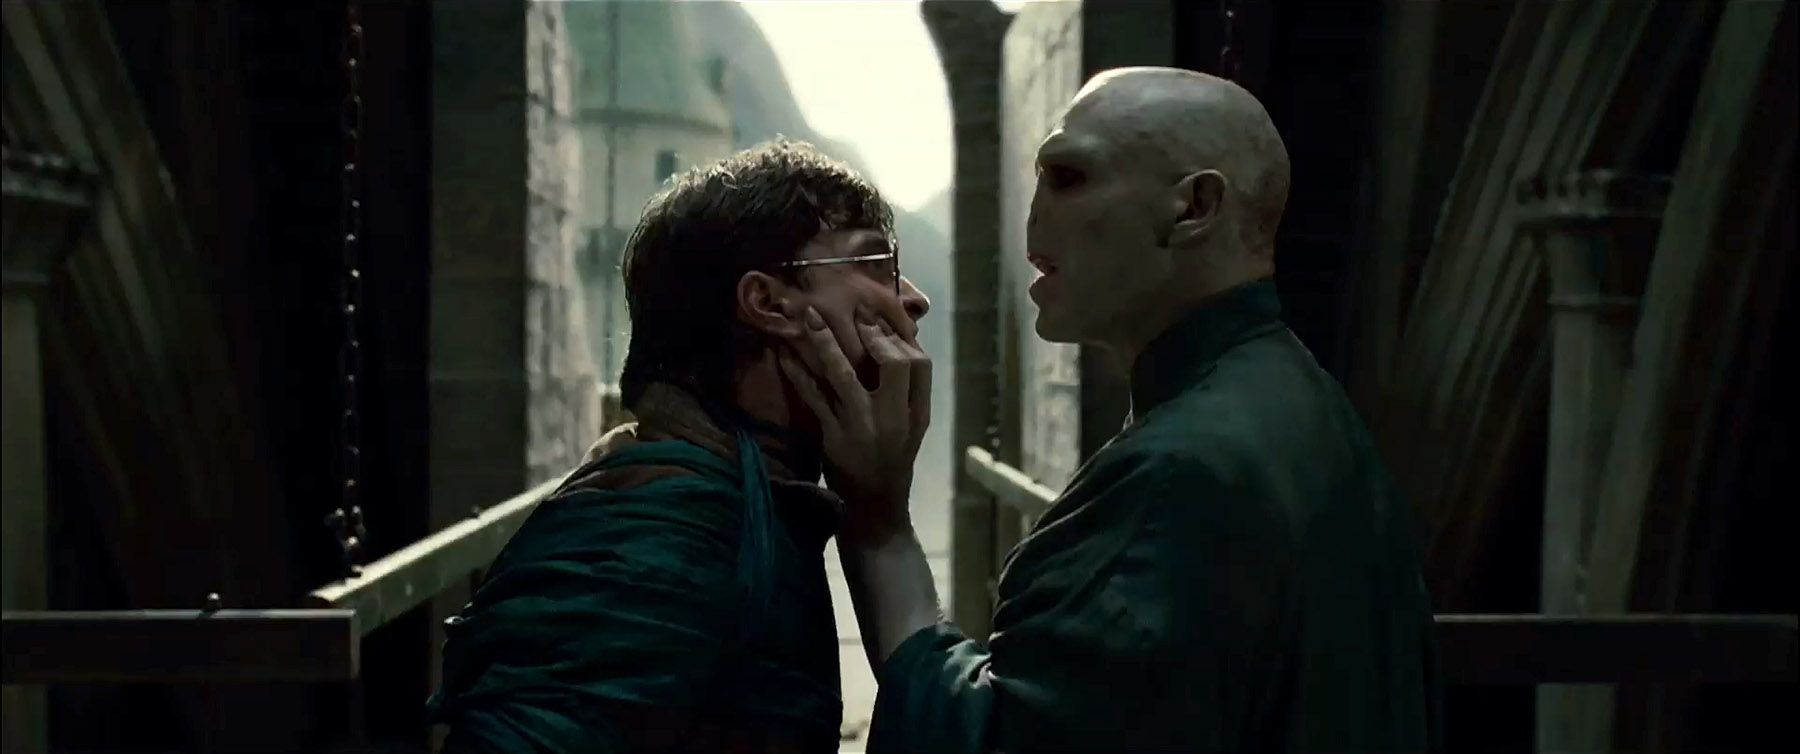 Harry Potter (Daniel Radcliffe) and Lord Voldemort (Ralph Fiennes)